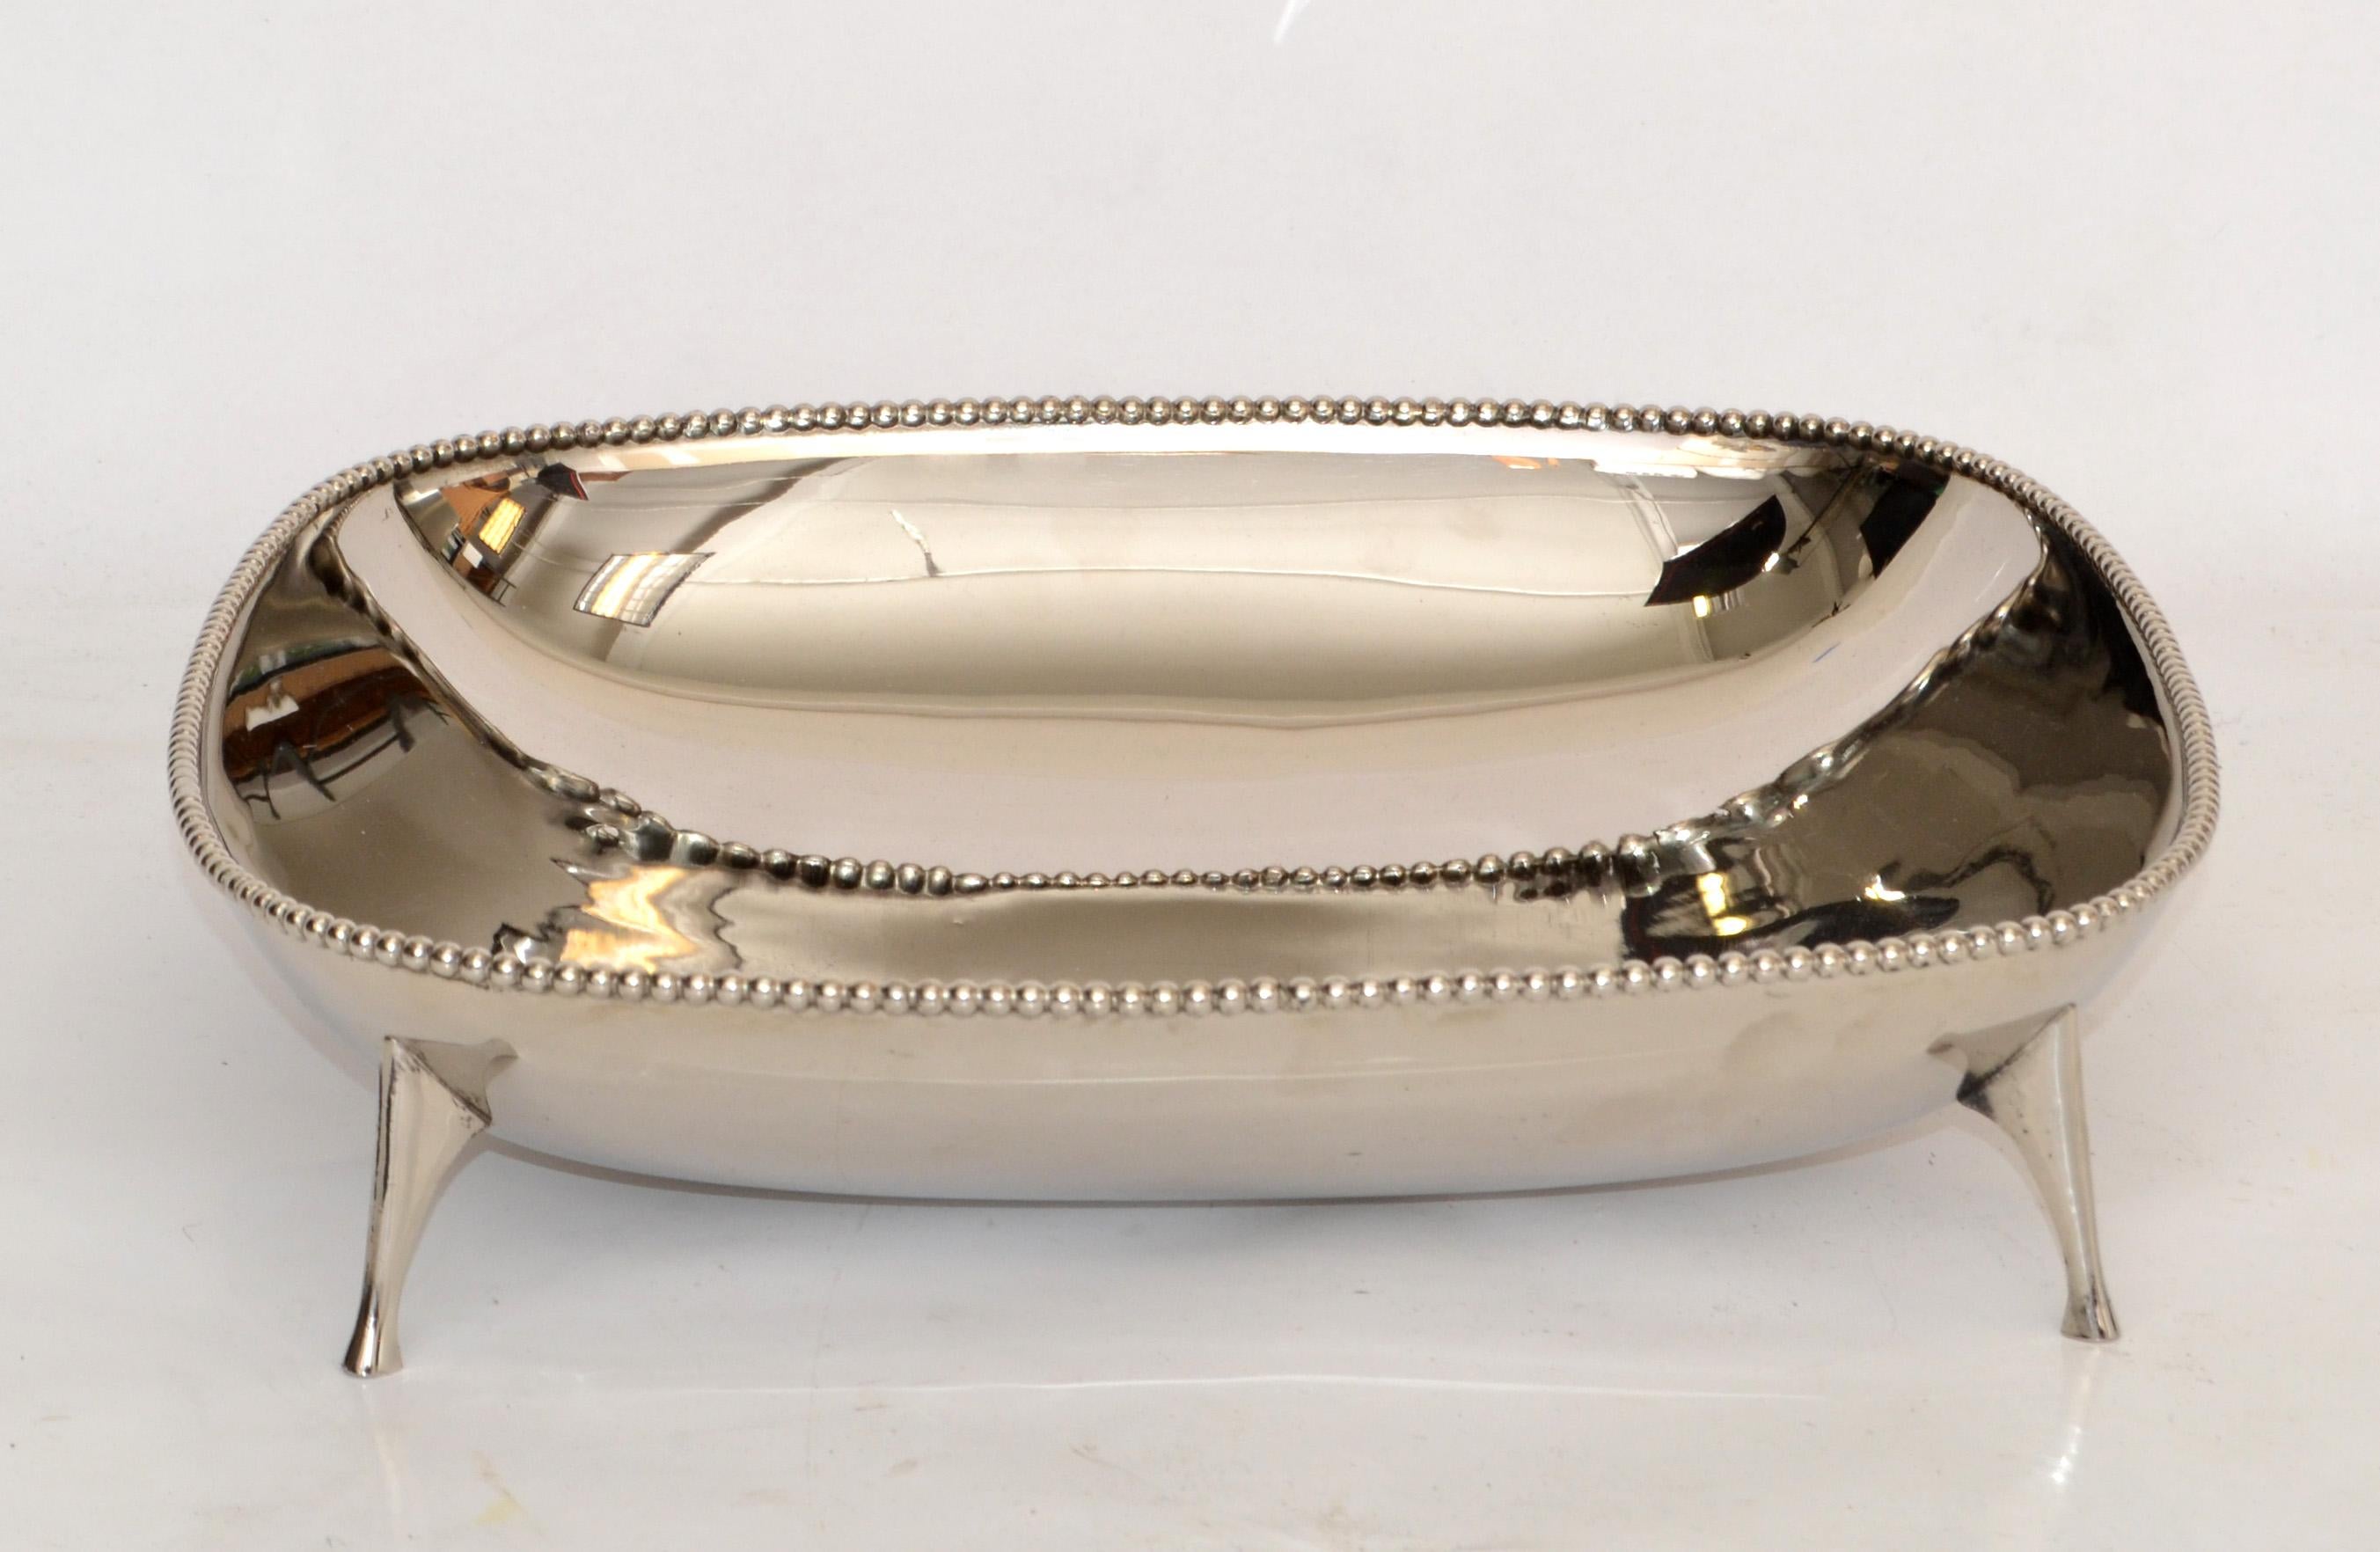 Charming Art Deco square shaped footed bowl Silver Plated Steel and with silver ball Border.
Great for your coffee table display or as a centerpiece.
The Bowl has been recently polished.